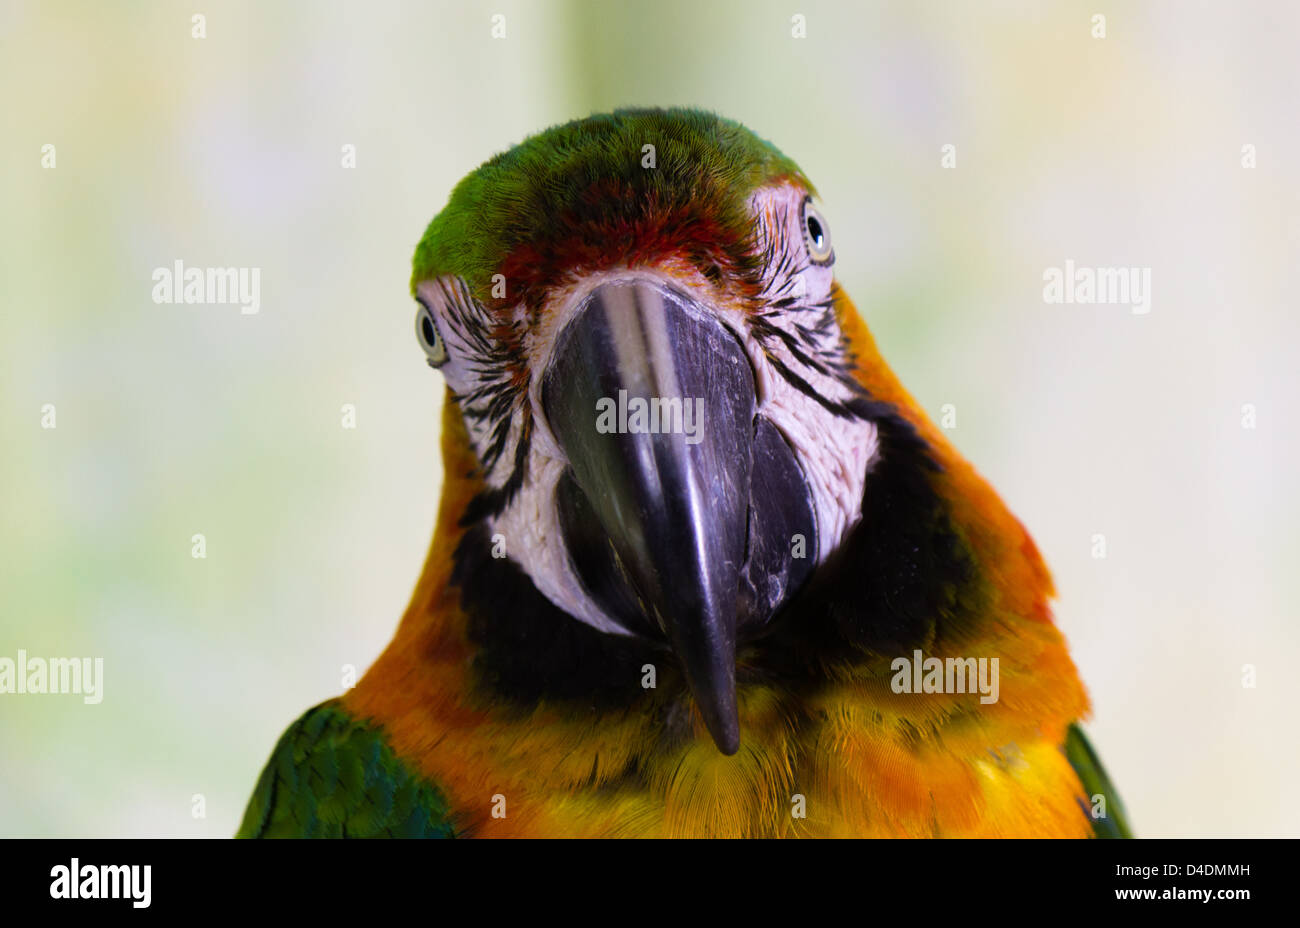 Macaw Parrot looking at camera Banque D'Images